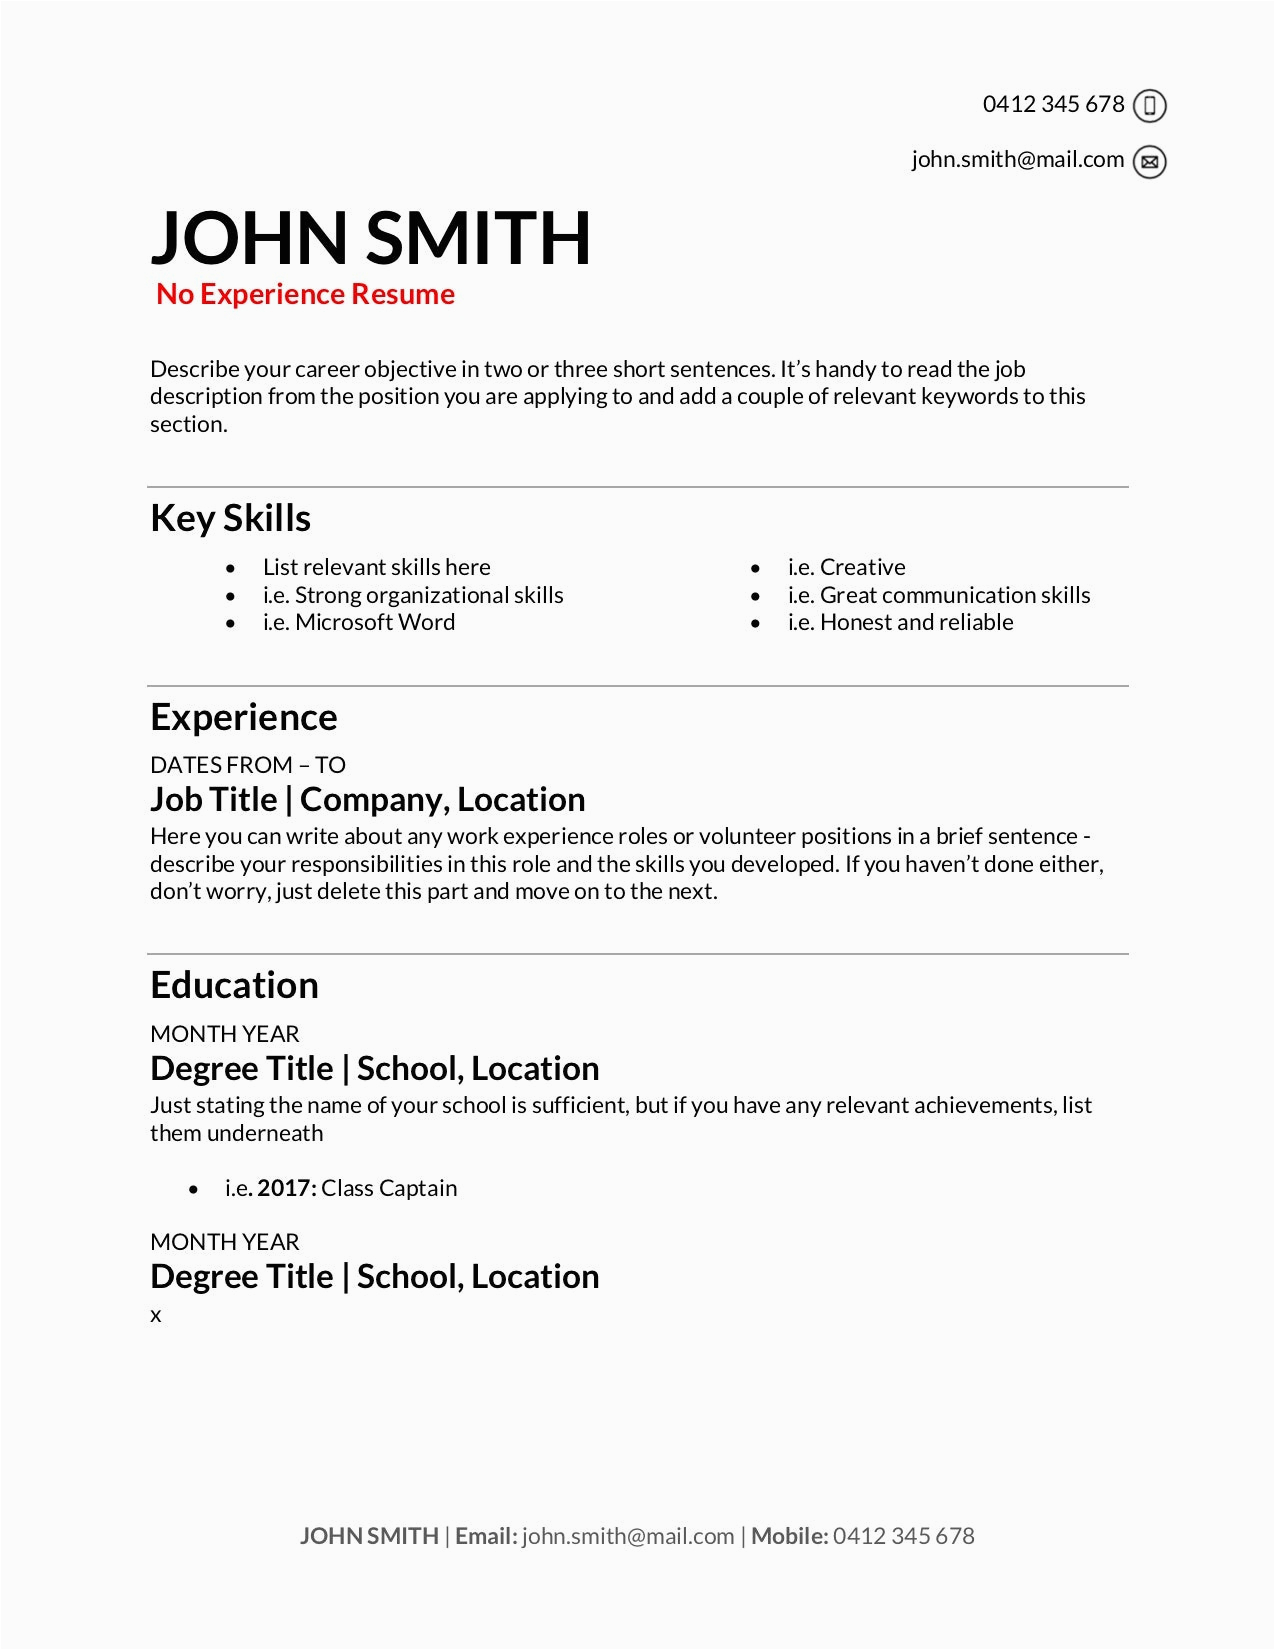 nursing student resume with no experience pdf collection